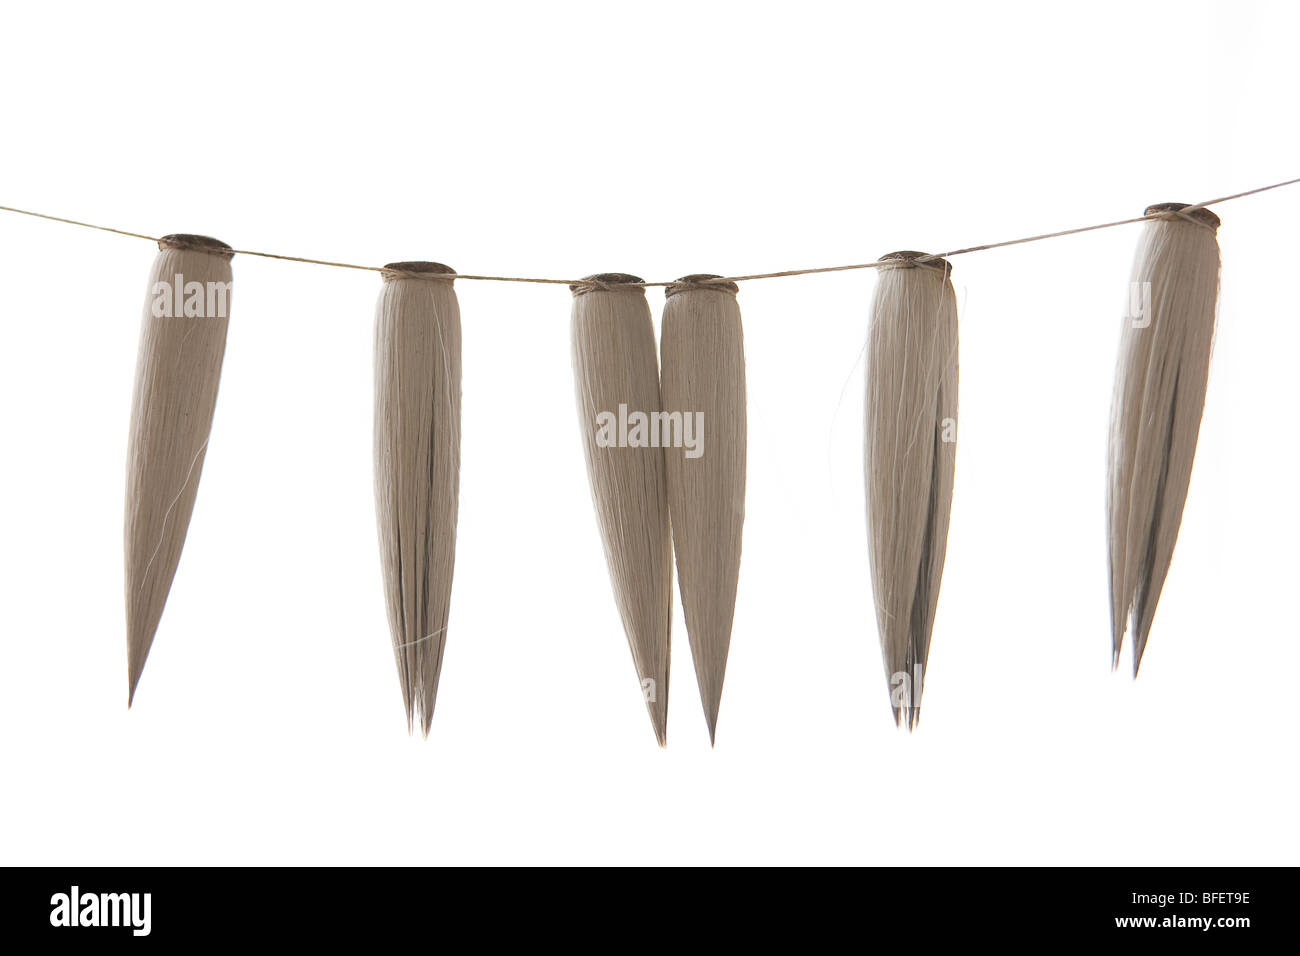 The horse hair heads of calligraphy brushes hanging in a brush makers studio. Stock Photo